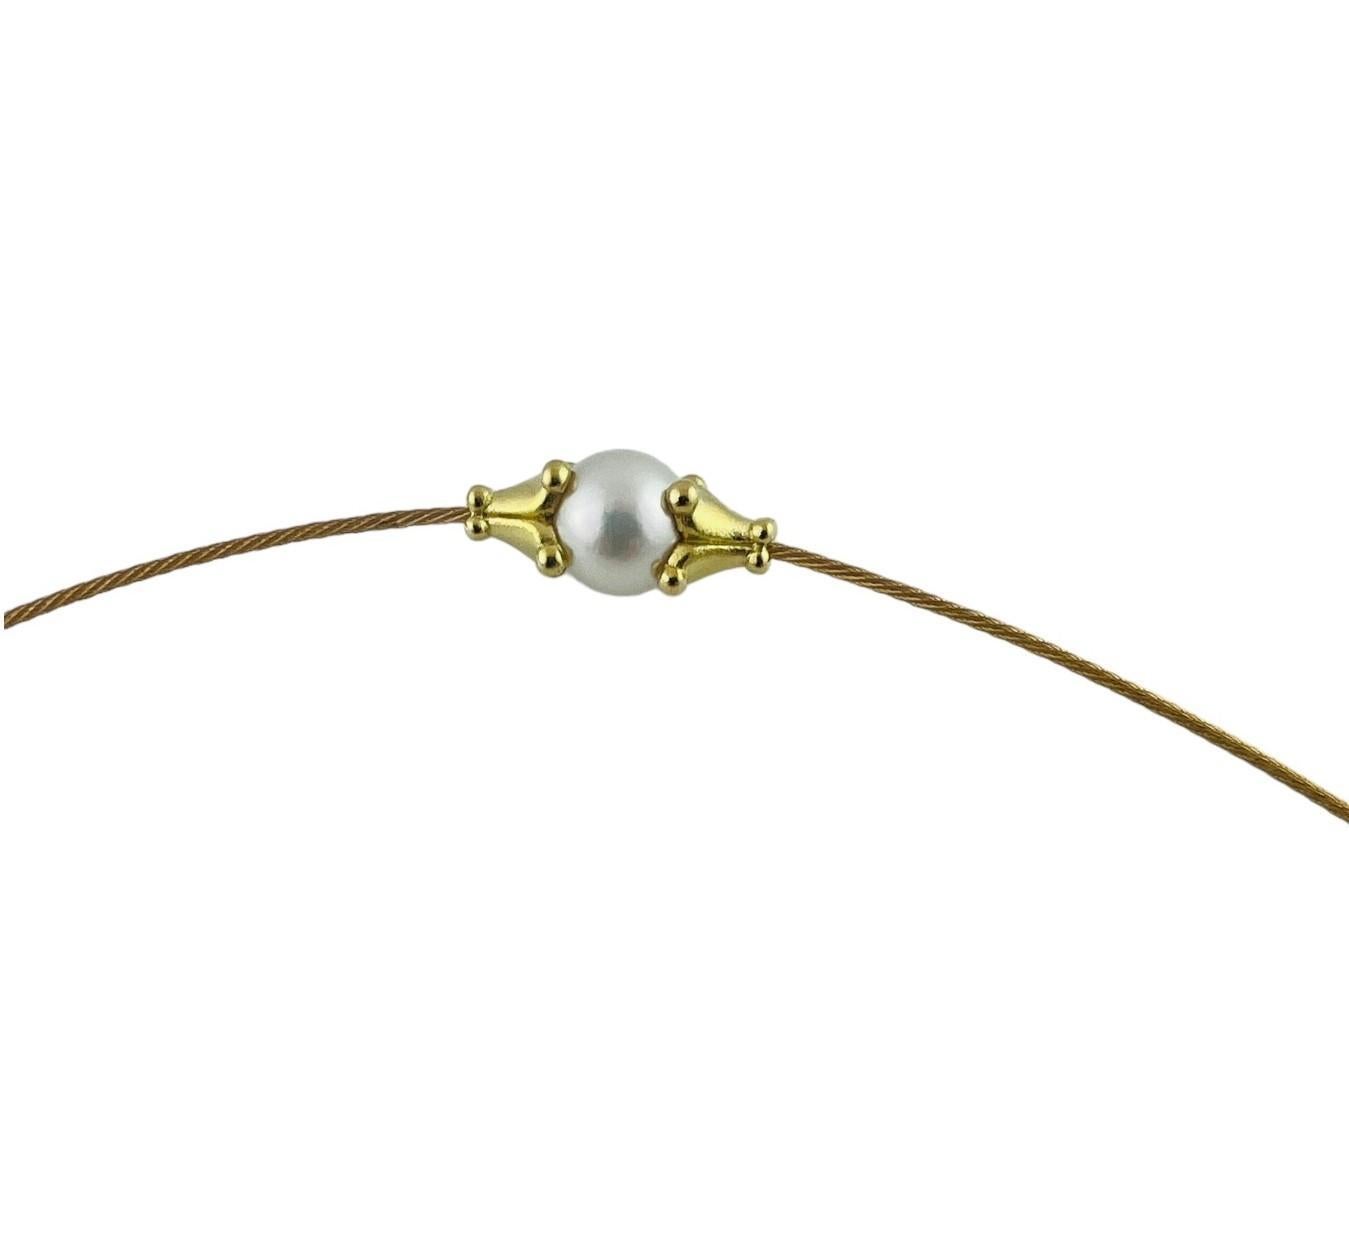 Paul Morelli 18 Karat Yellow Gold and Pearl Necklace #16748 In Good Condition For Sale In Washington Depot, CT